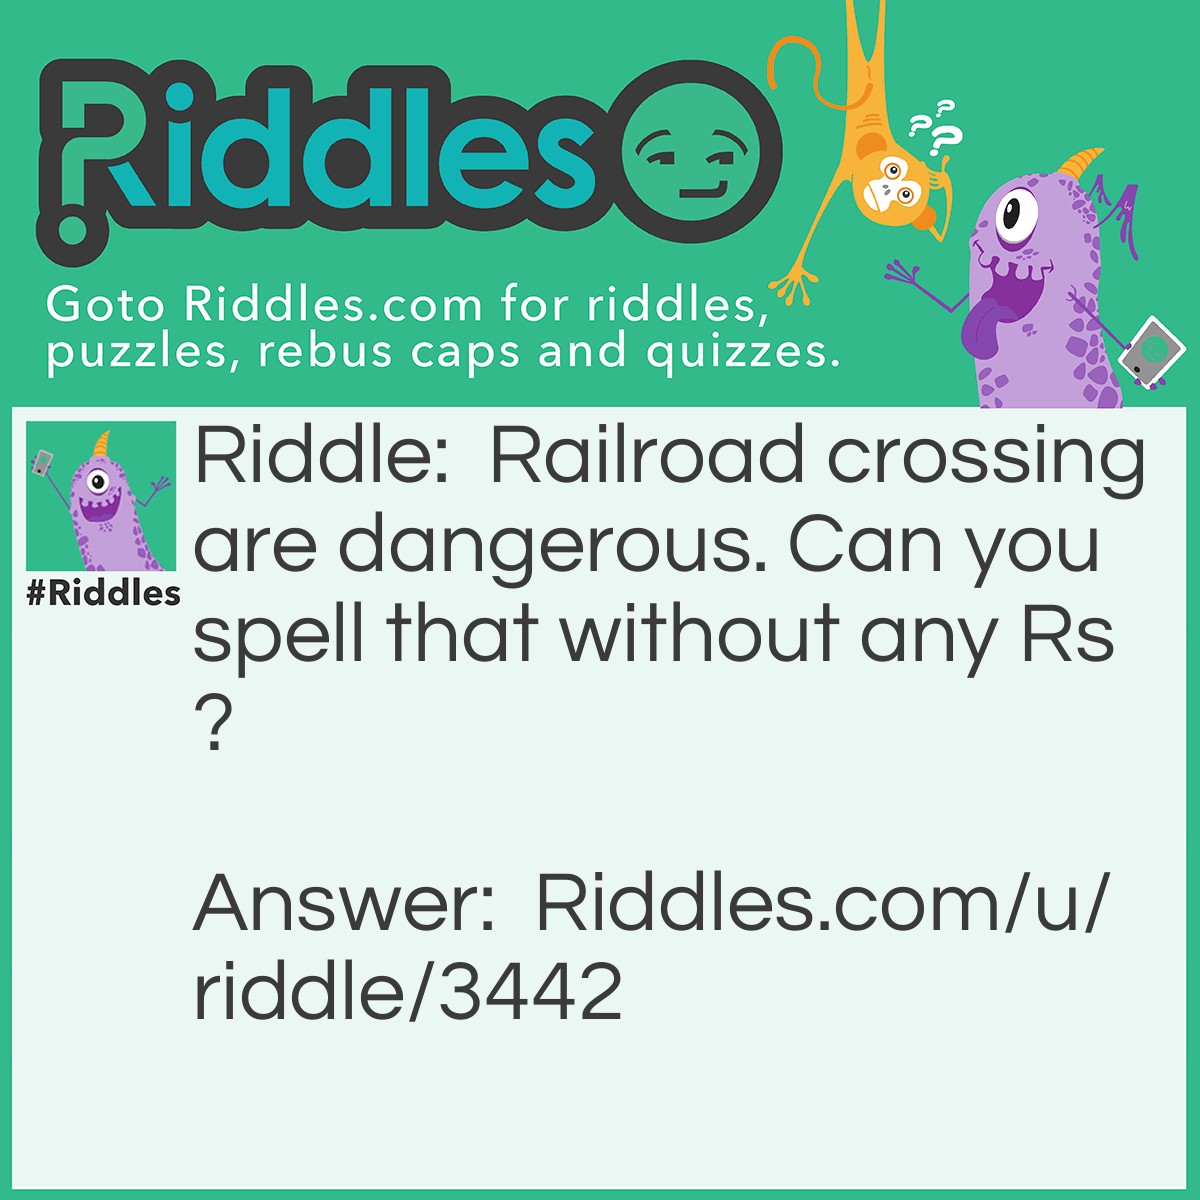 Riddle: Railroad crossing are dangerous. Can you spell that without any Rs? Answer: T-H-A-T.